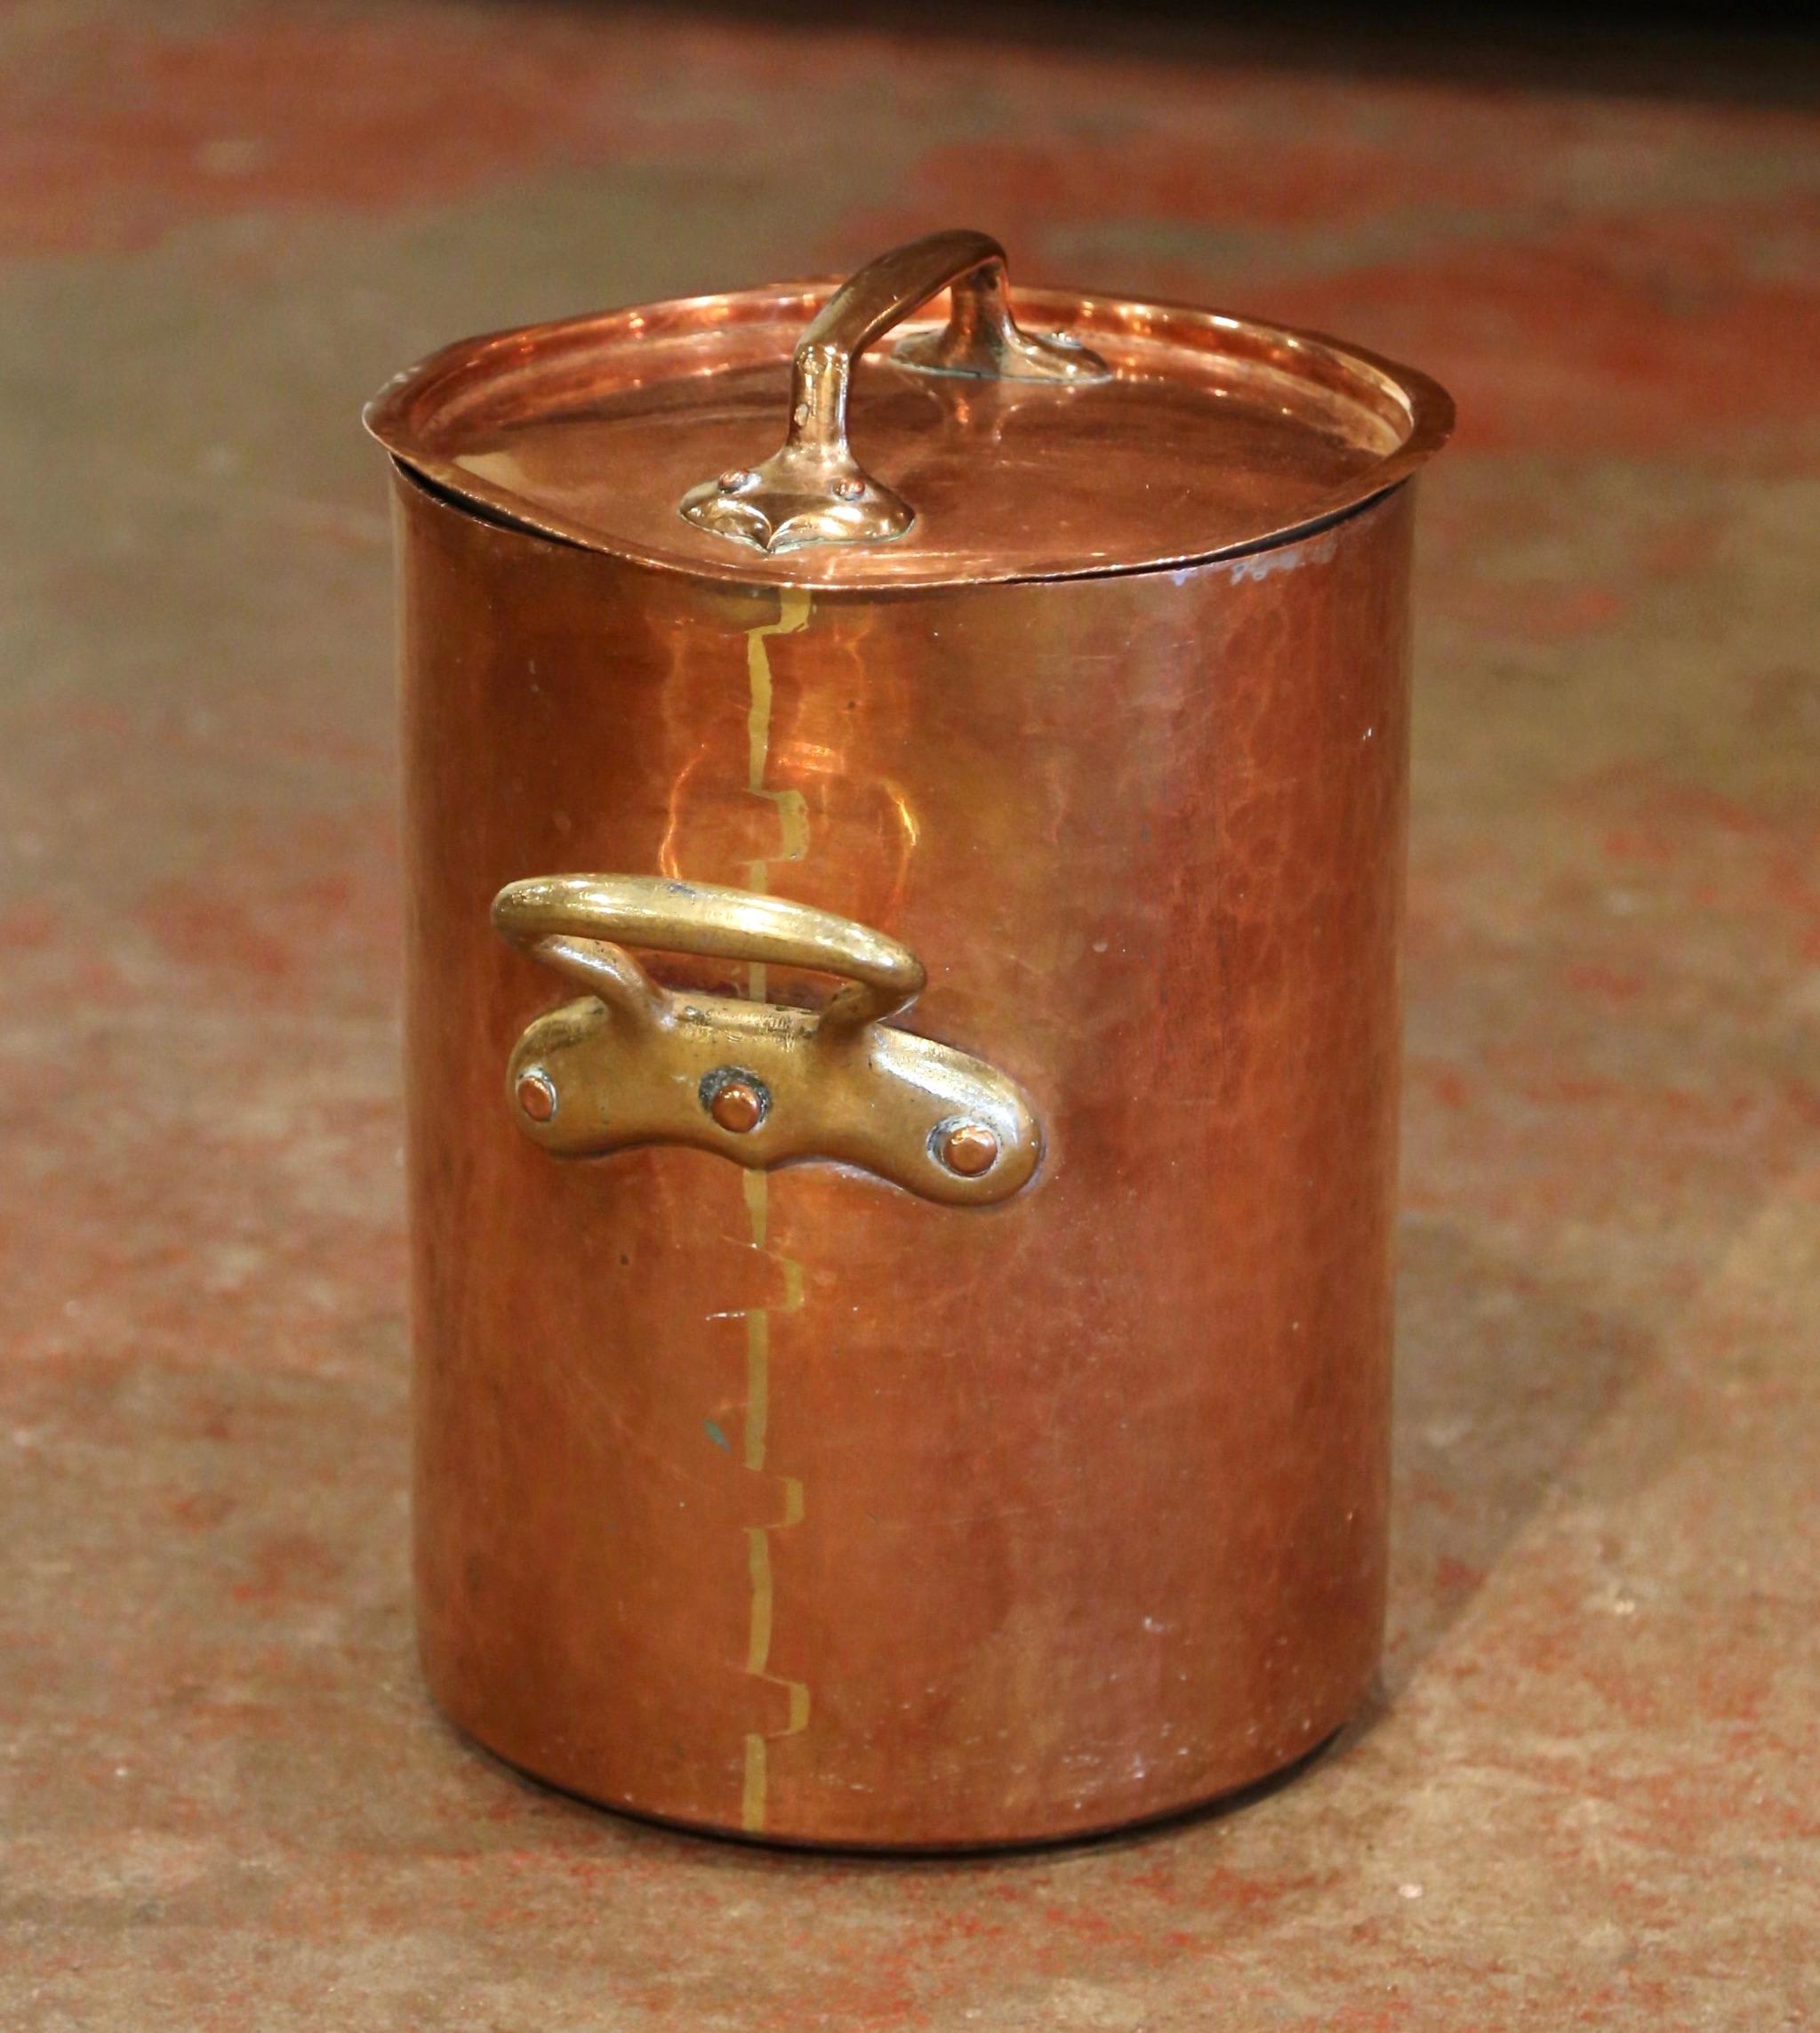 Country Mid-19th Century French Polished Copper Cauldron with Side Handles and Lid